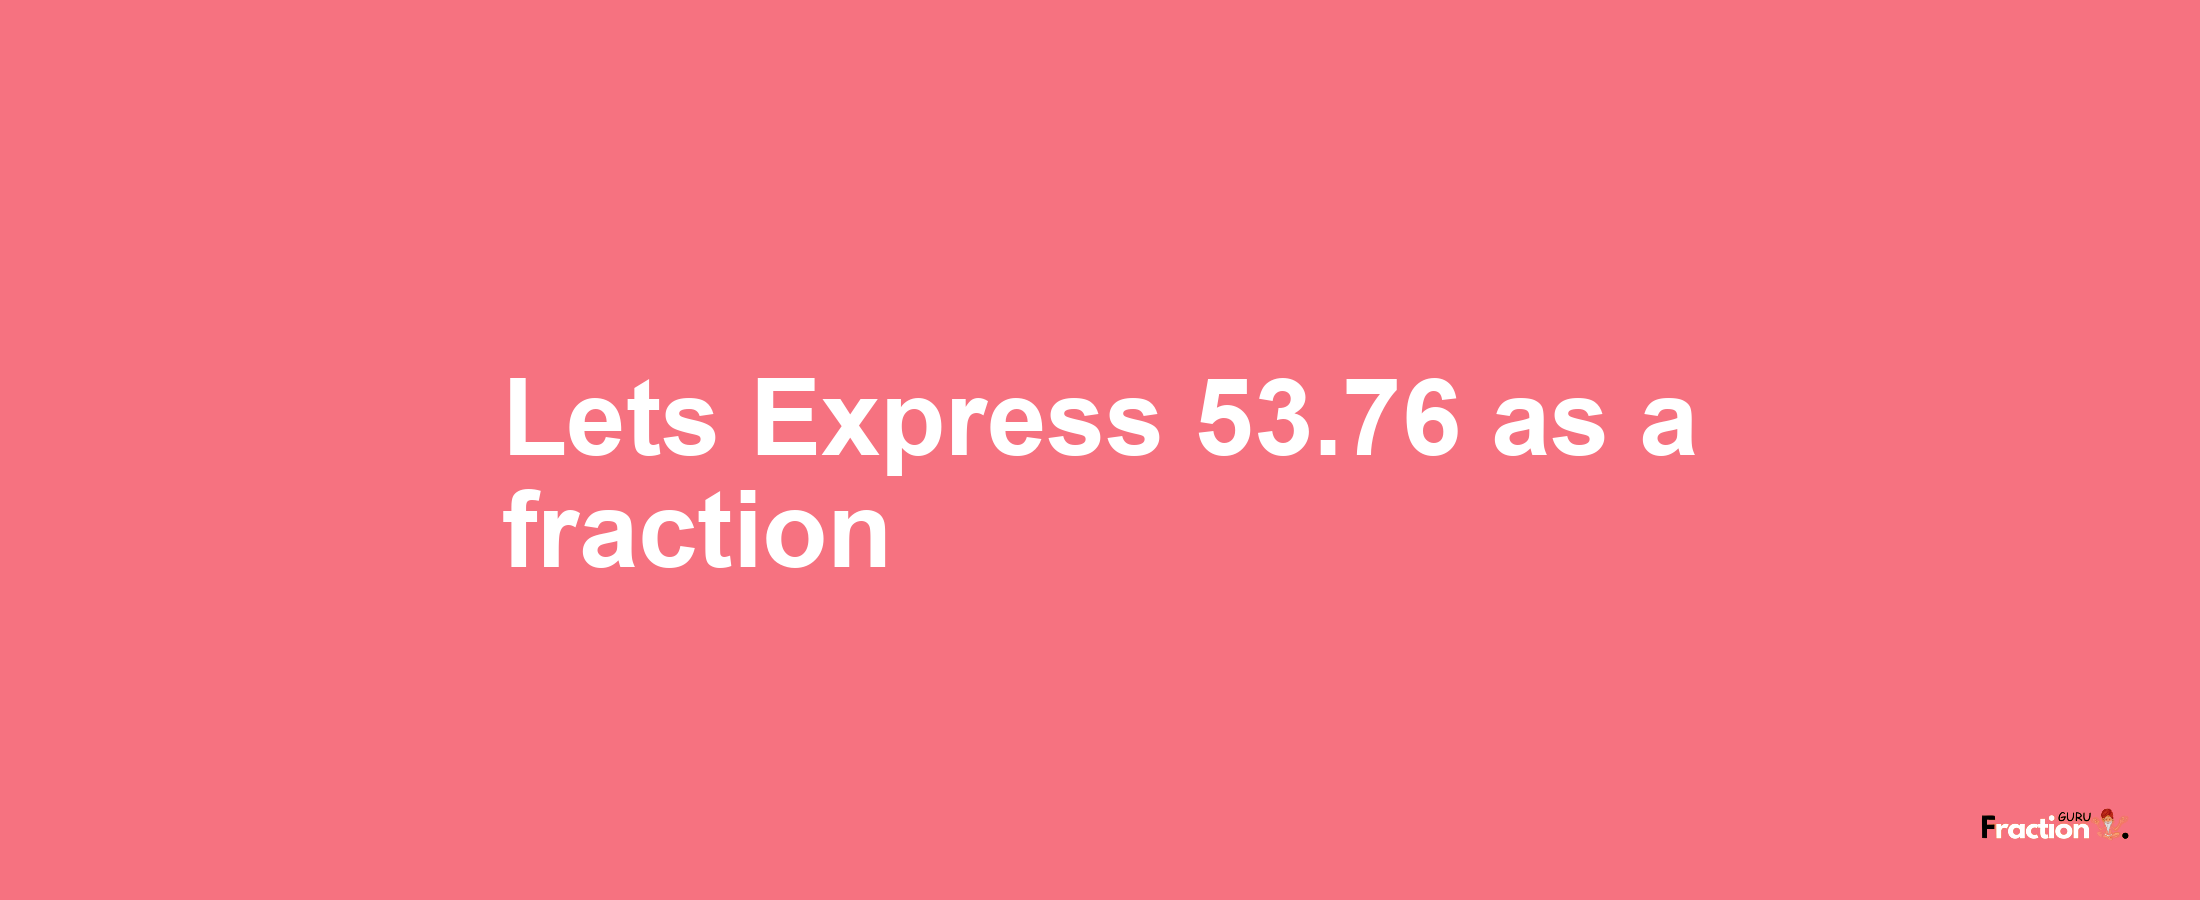 Lets Express 53.76 as afraction